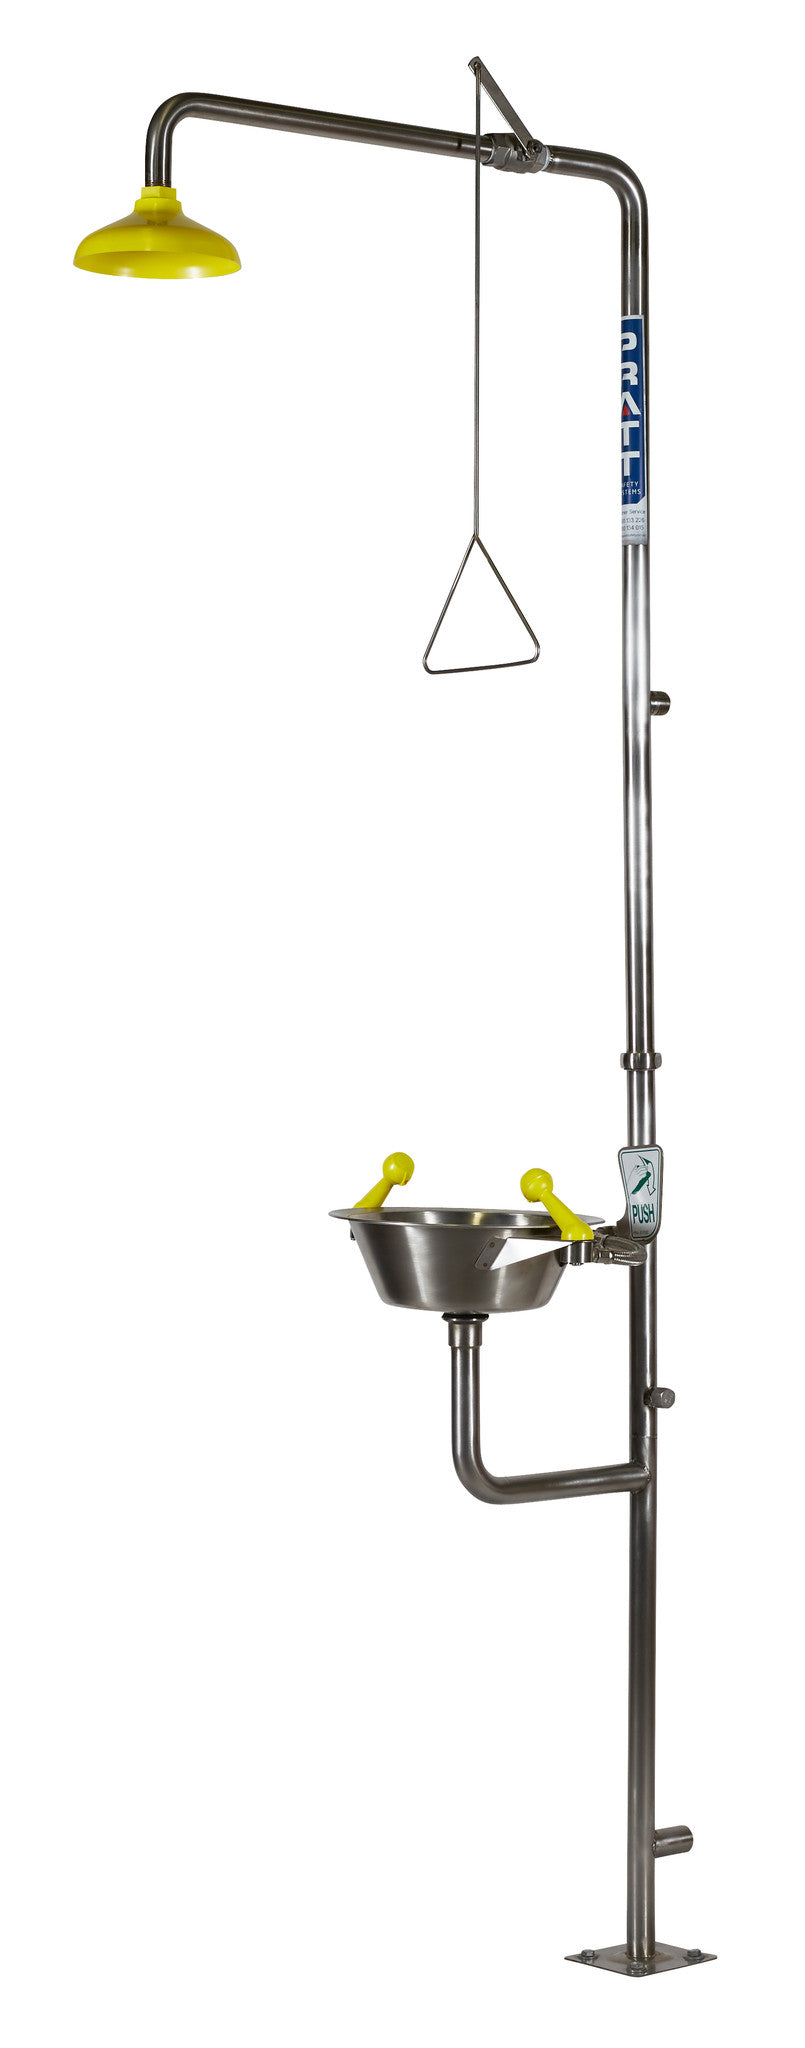 Pratt Combination Safety Shower & Eye Wash Hand Operated with bowl, Safety Showers & Eye/Face Washes - DG Safety